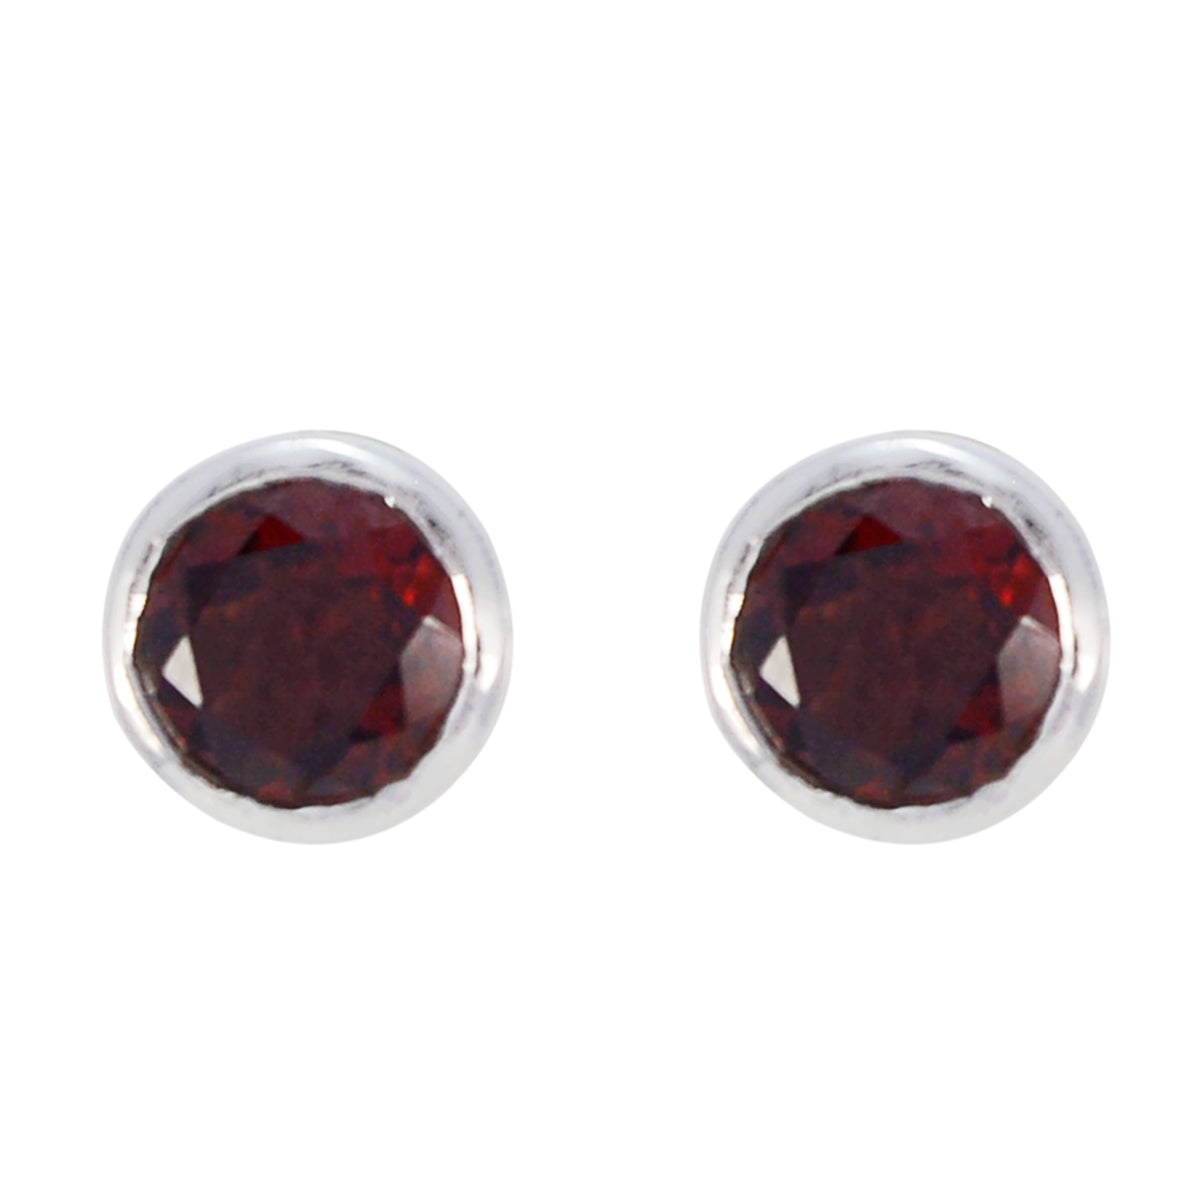 Riyo Nice Gemstone round Faceted Red Garnet Silver Earrings gift for mother